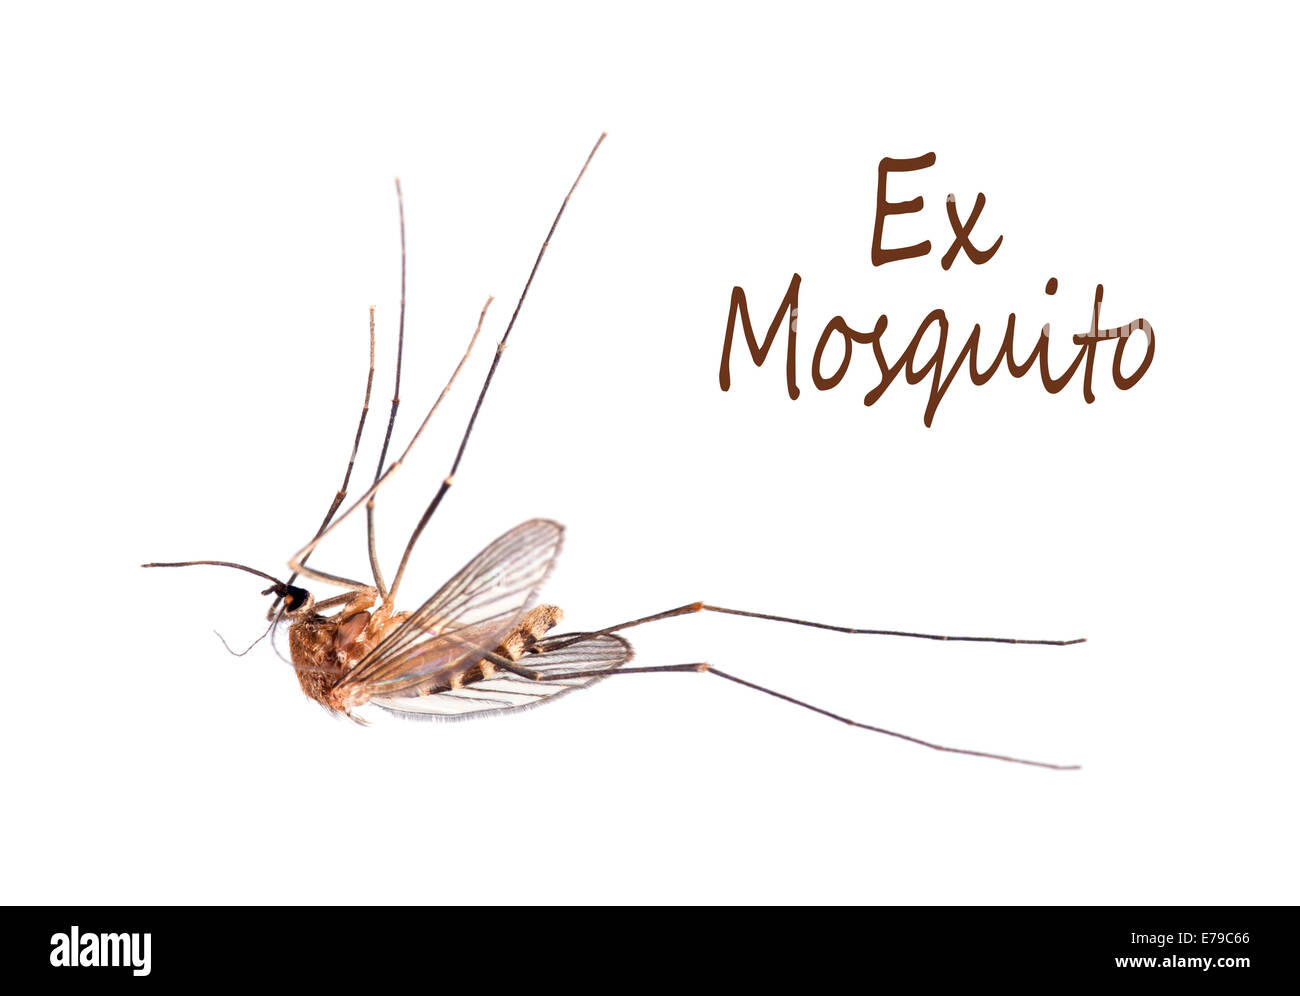 Dead mosquito.  Summer problem, disease carrier. Stock Photo